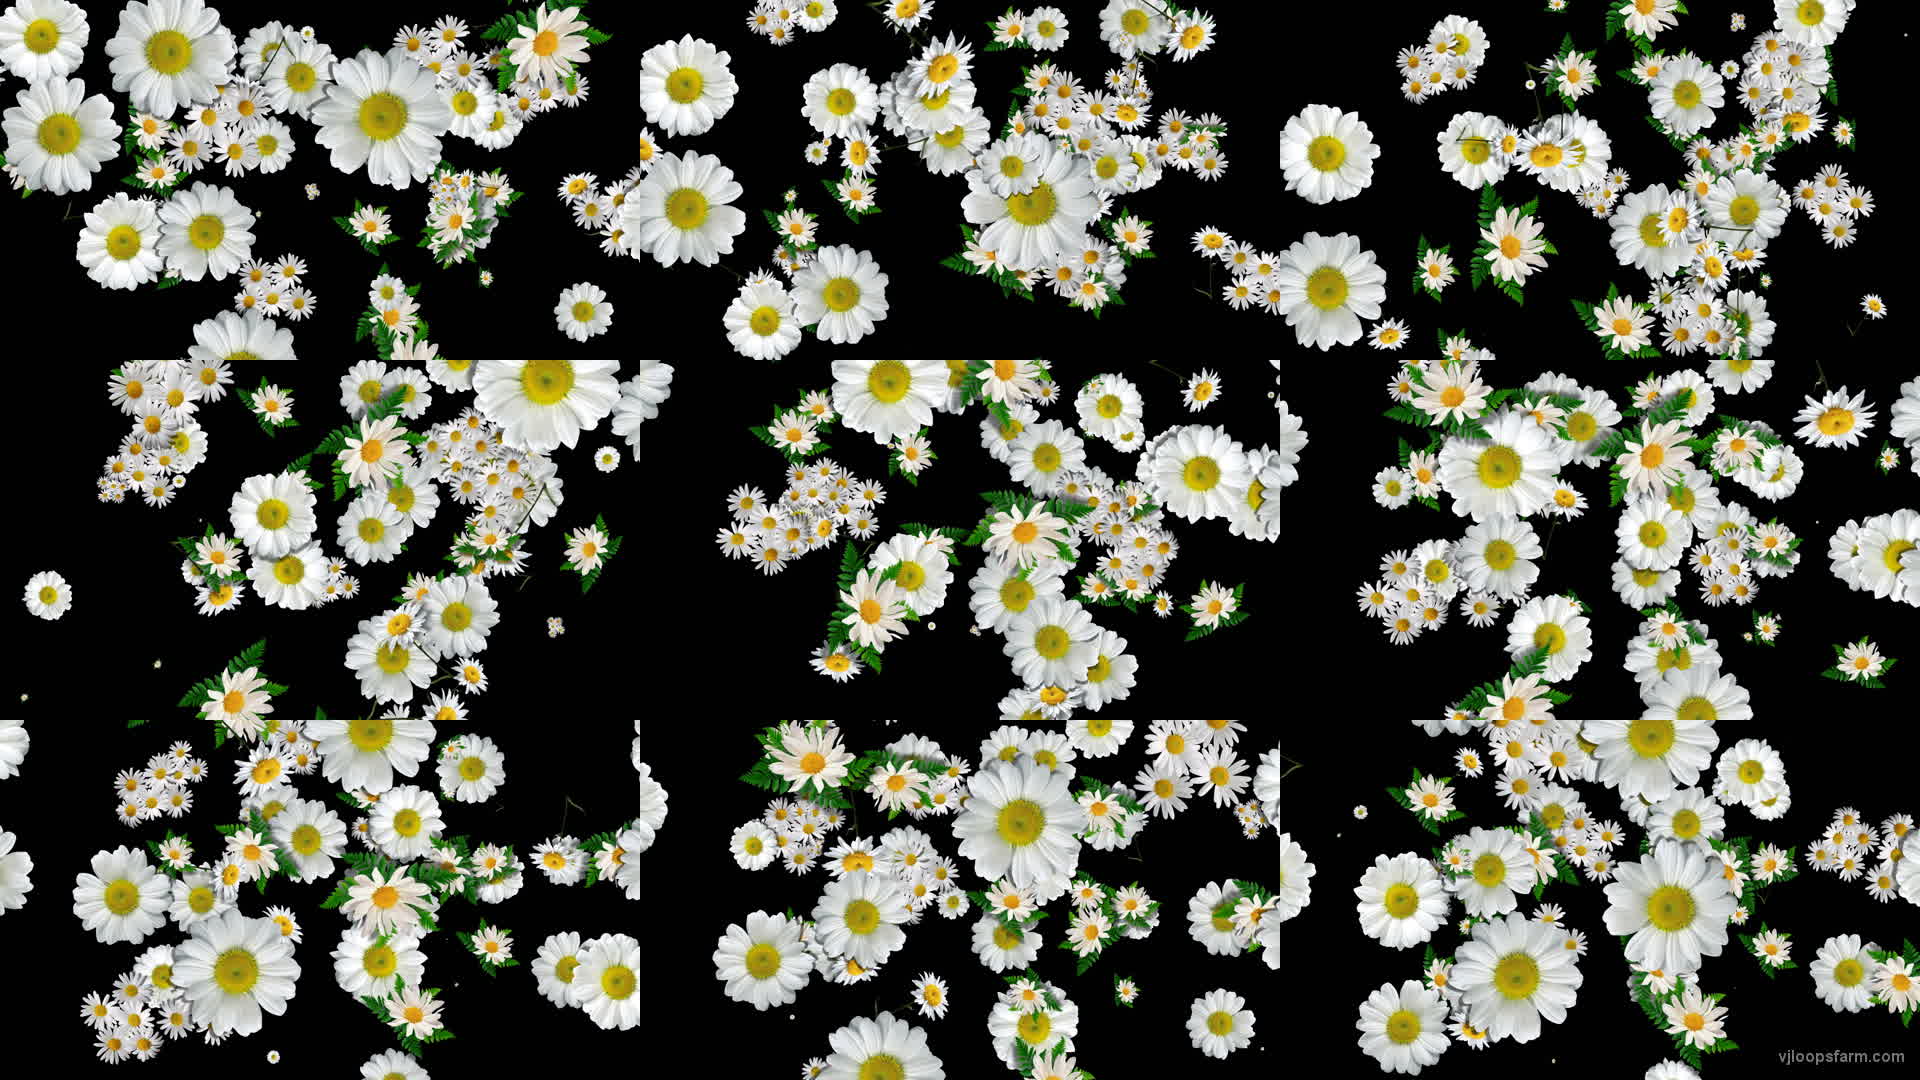 Big Chamomile White Flowers Infinite Looped Fall Down Video Decoration